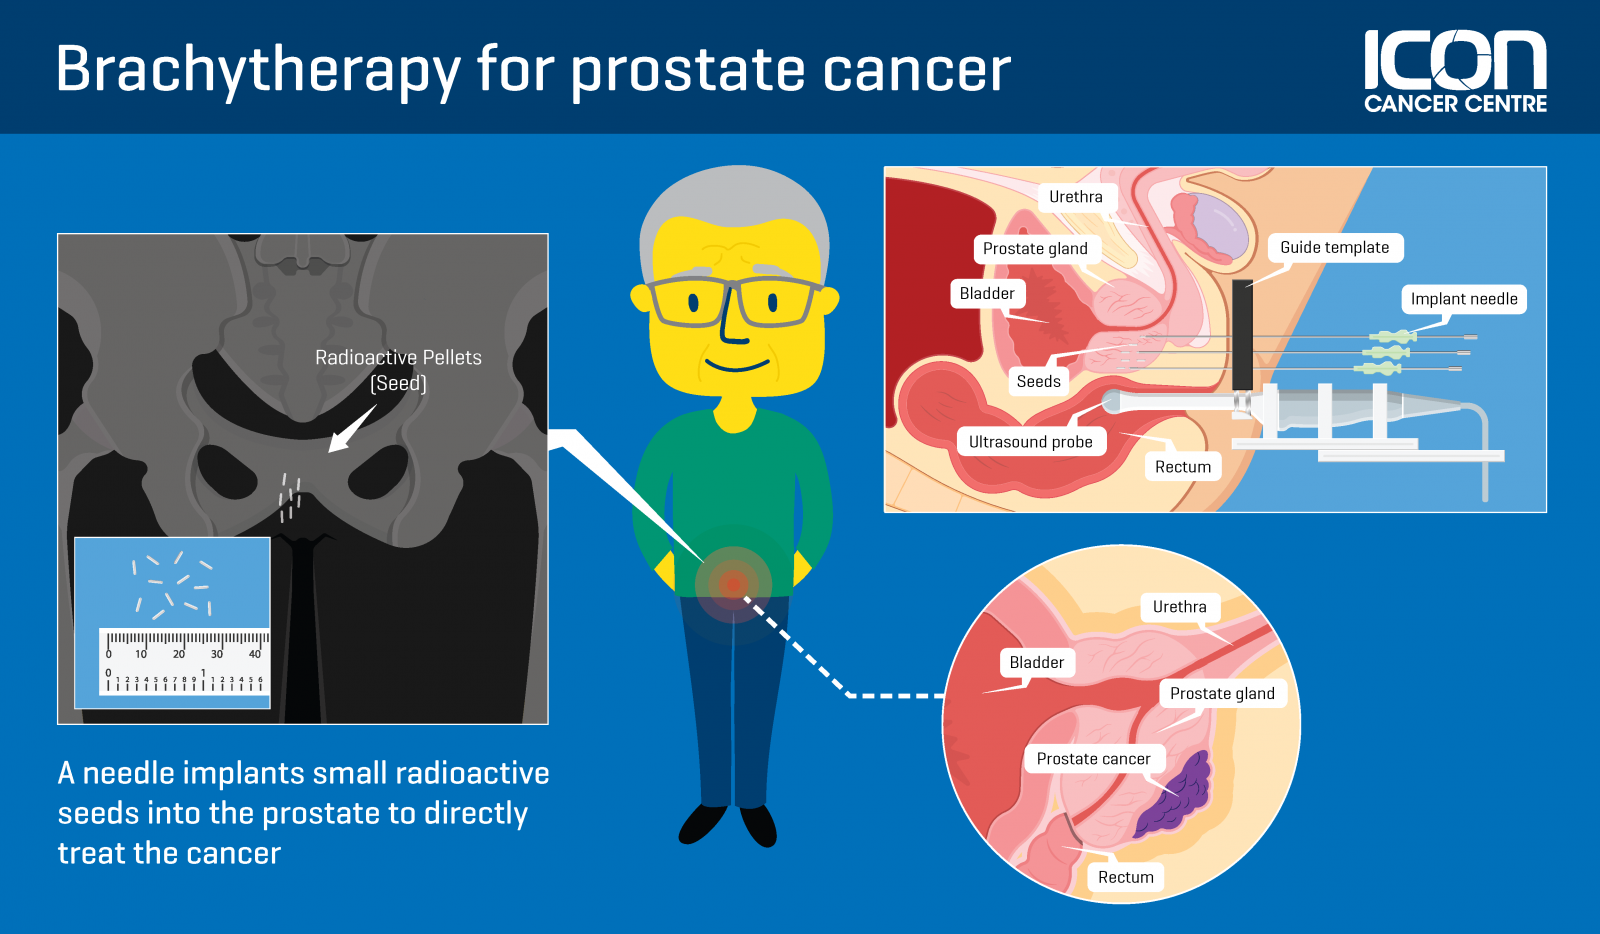 Focal brachytherapy for prostate cancer â Icon Cancer Centre